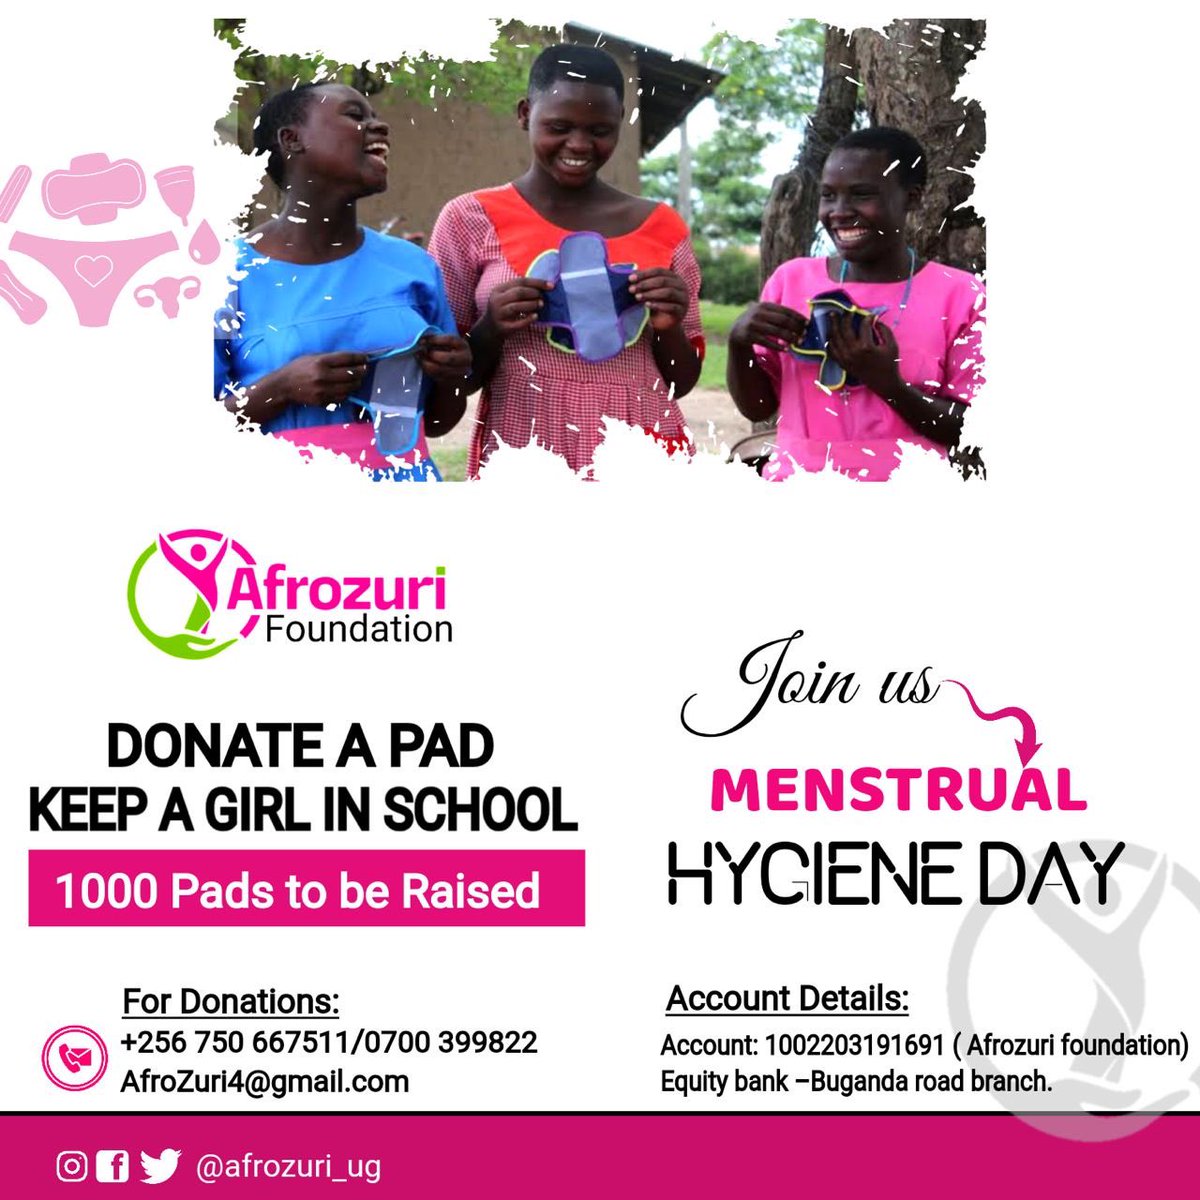 Join our pads collection campaign ahead of World Menstrual Hygiene day. Providing vulnerable girls with reusable sanitary pads will not only promote dignified menstruation but also keep them in school ensuring their dreams are fulfilled.  #PeriodPoverty  #Menstrualhealth